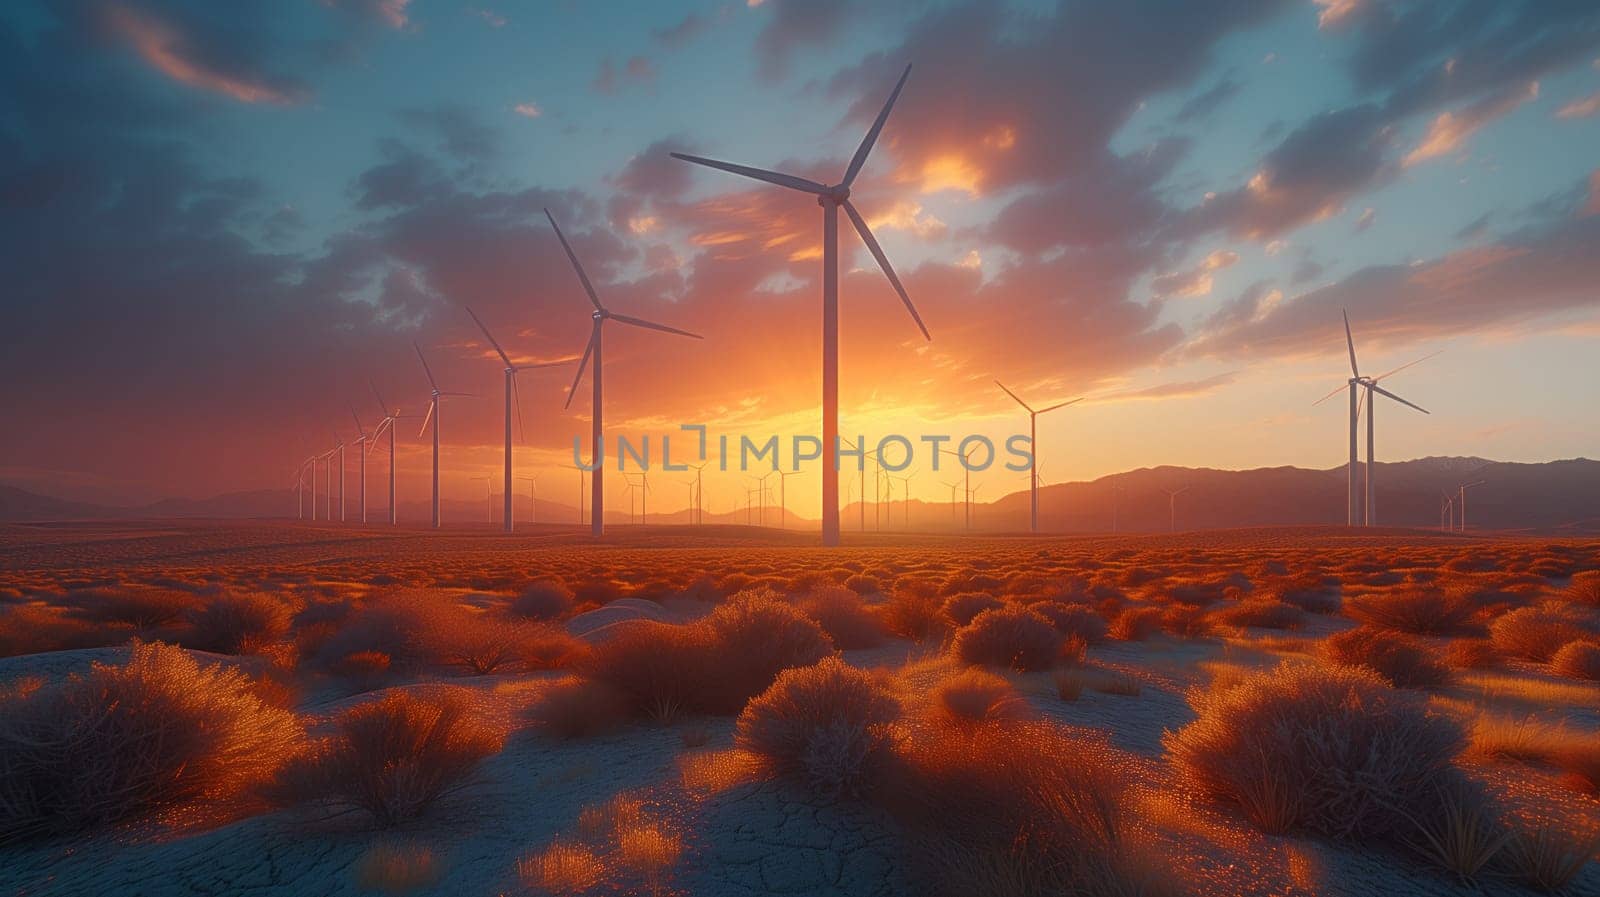 a row of wind turbines in a desert at sunset by richwolf